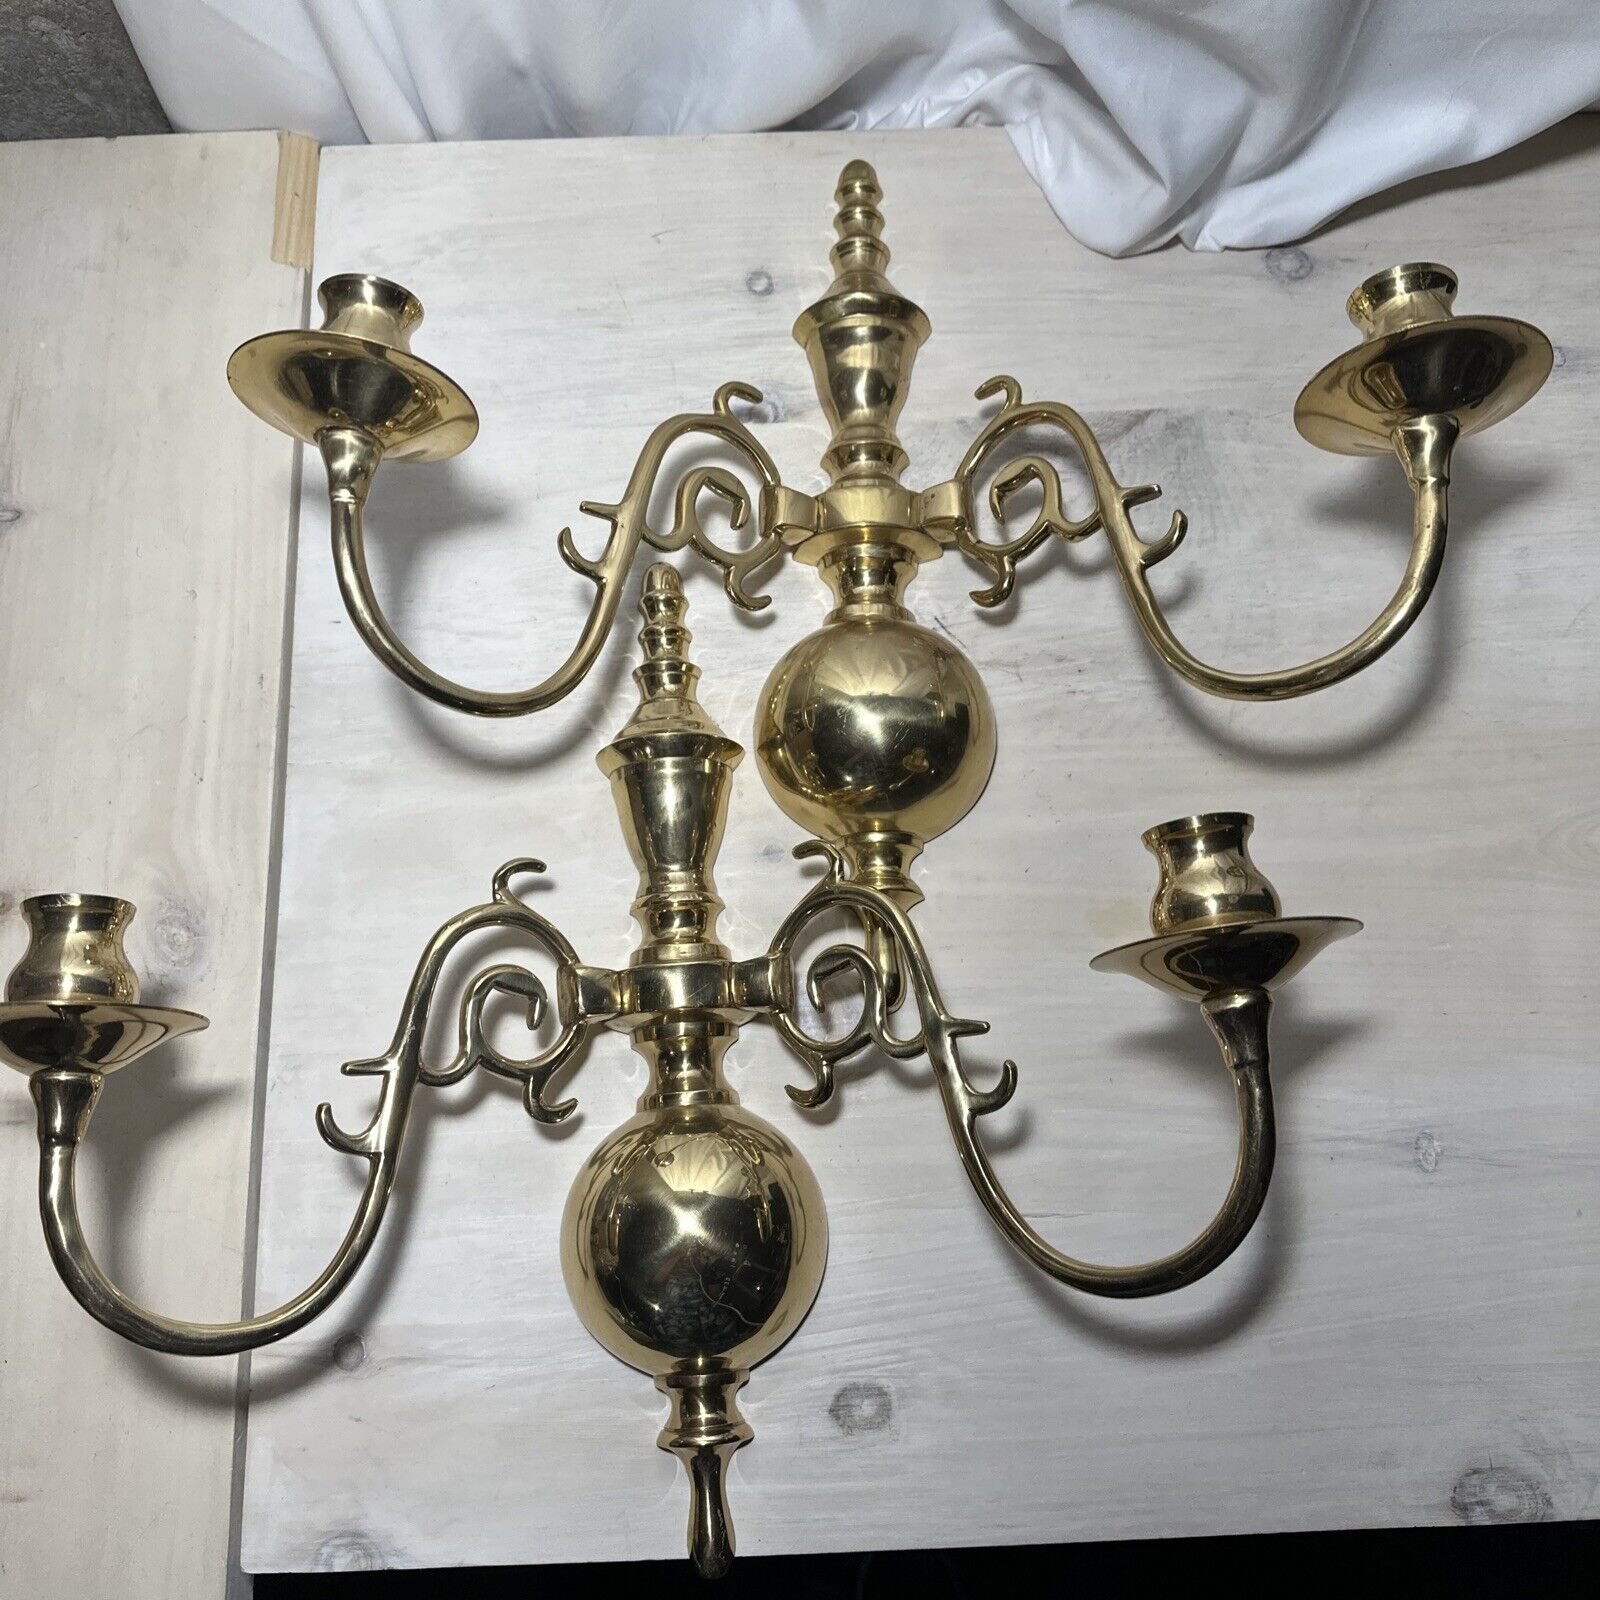 Pair Of Brass Candle Holder Sconces 2 Arm 16.5x14.5”